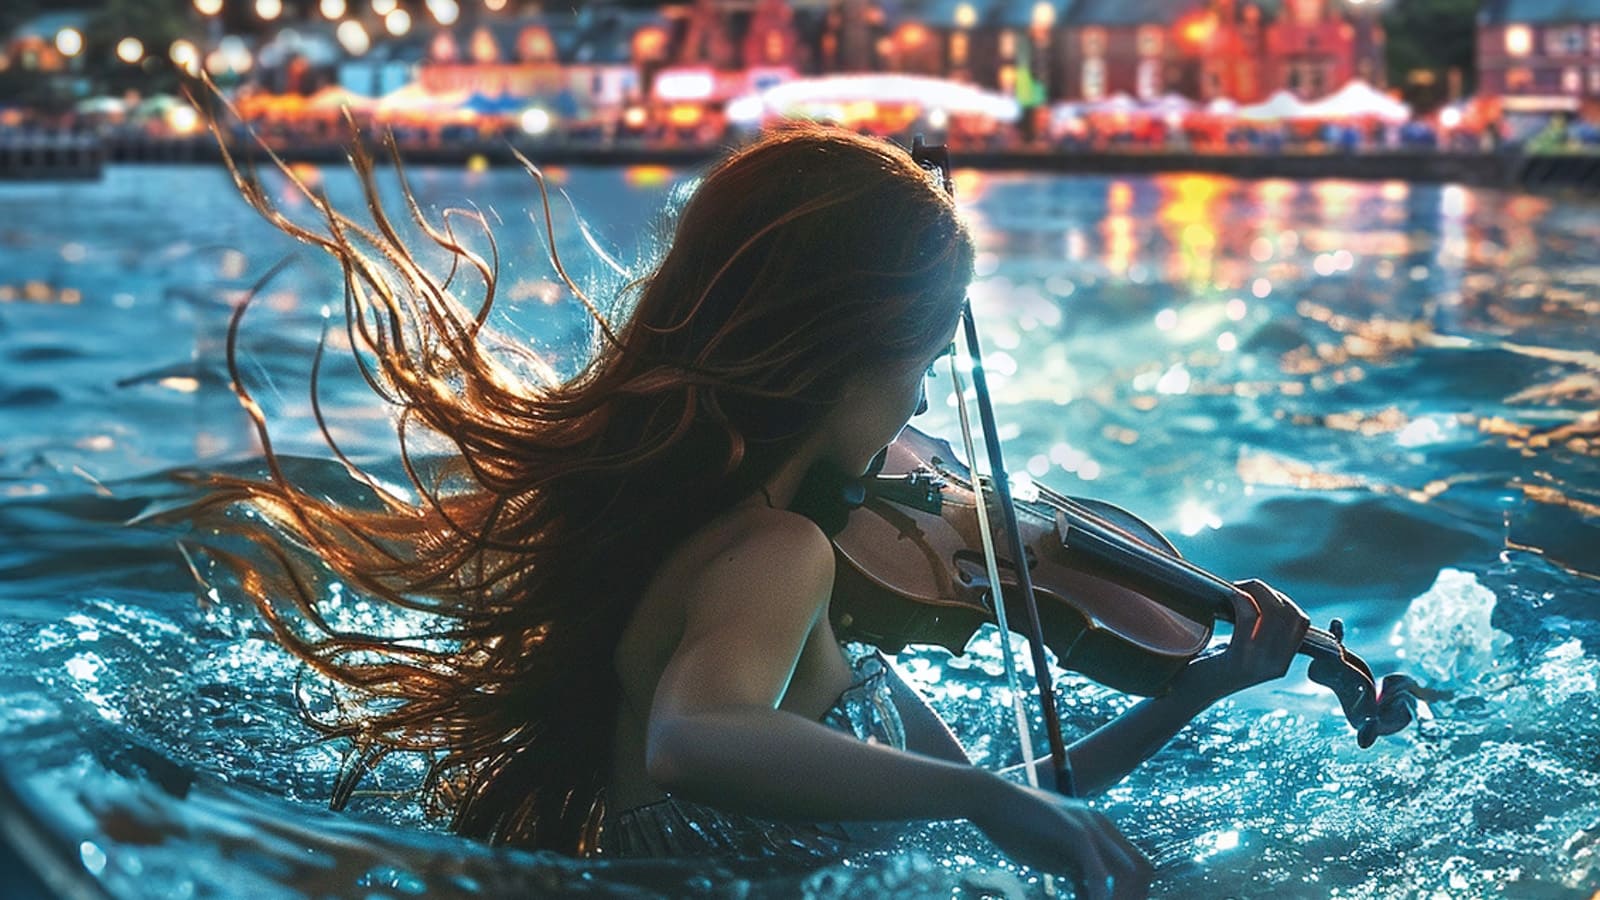 A fantastical image of a girl with red hair flying around her in the ocean playing the violin at night as she looks towards a seaside town with lights dancing over the water